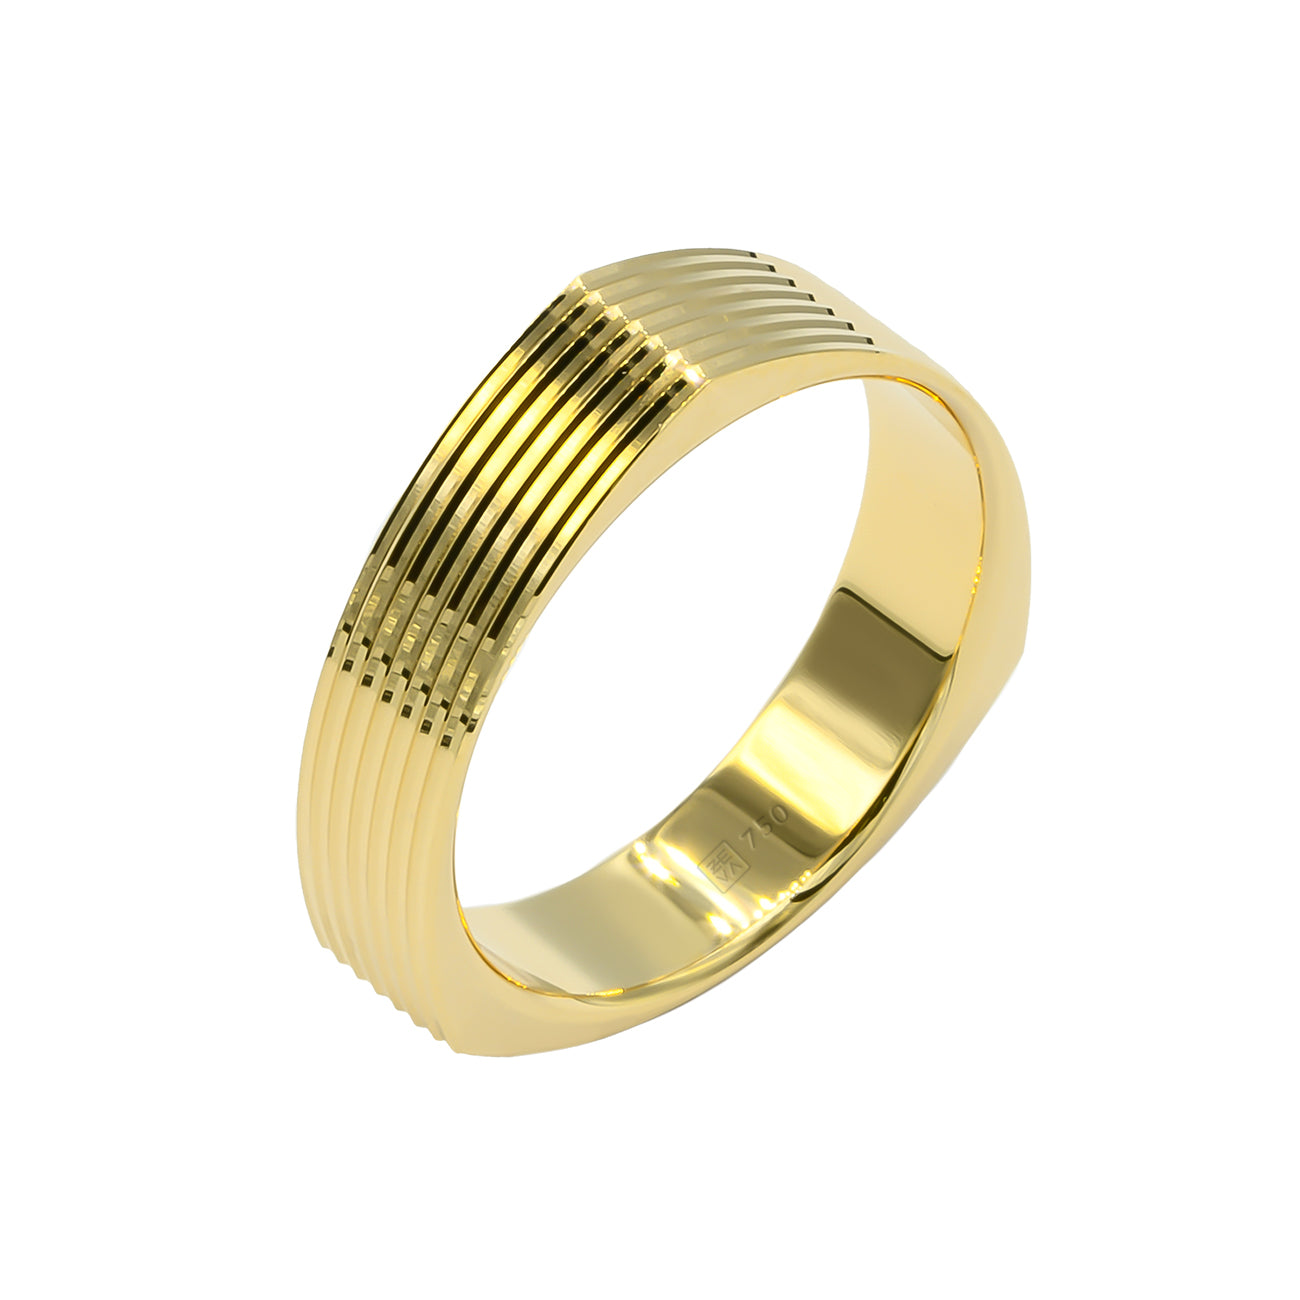 Ring DANCE straight lines 5mm yellow gold 18K